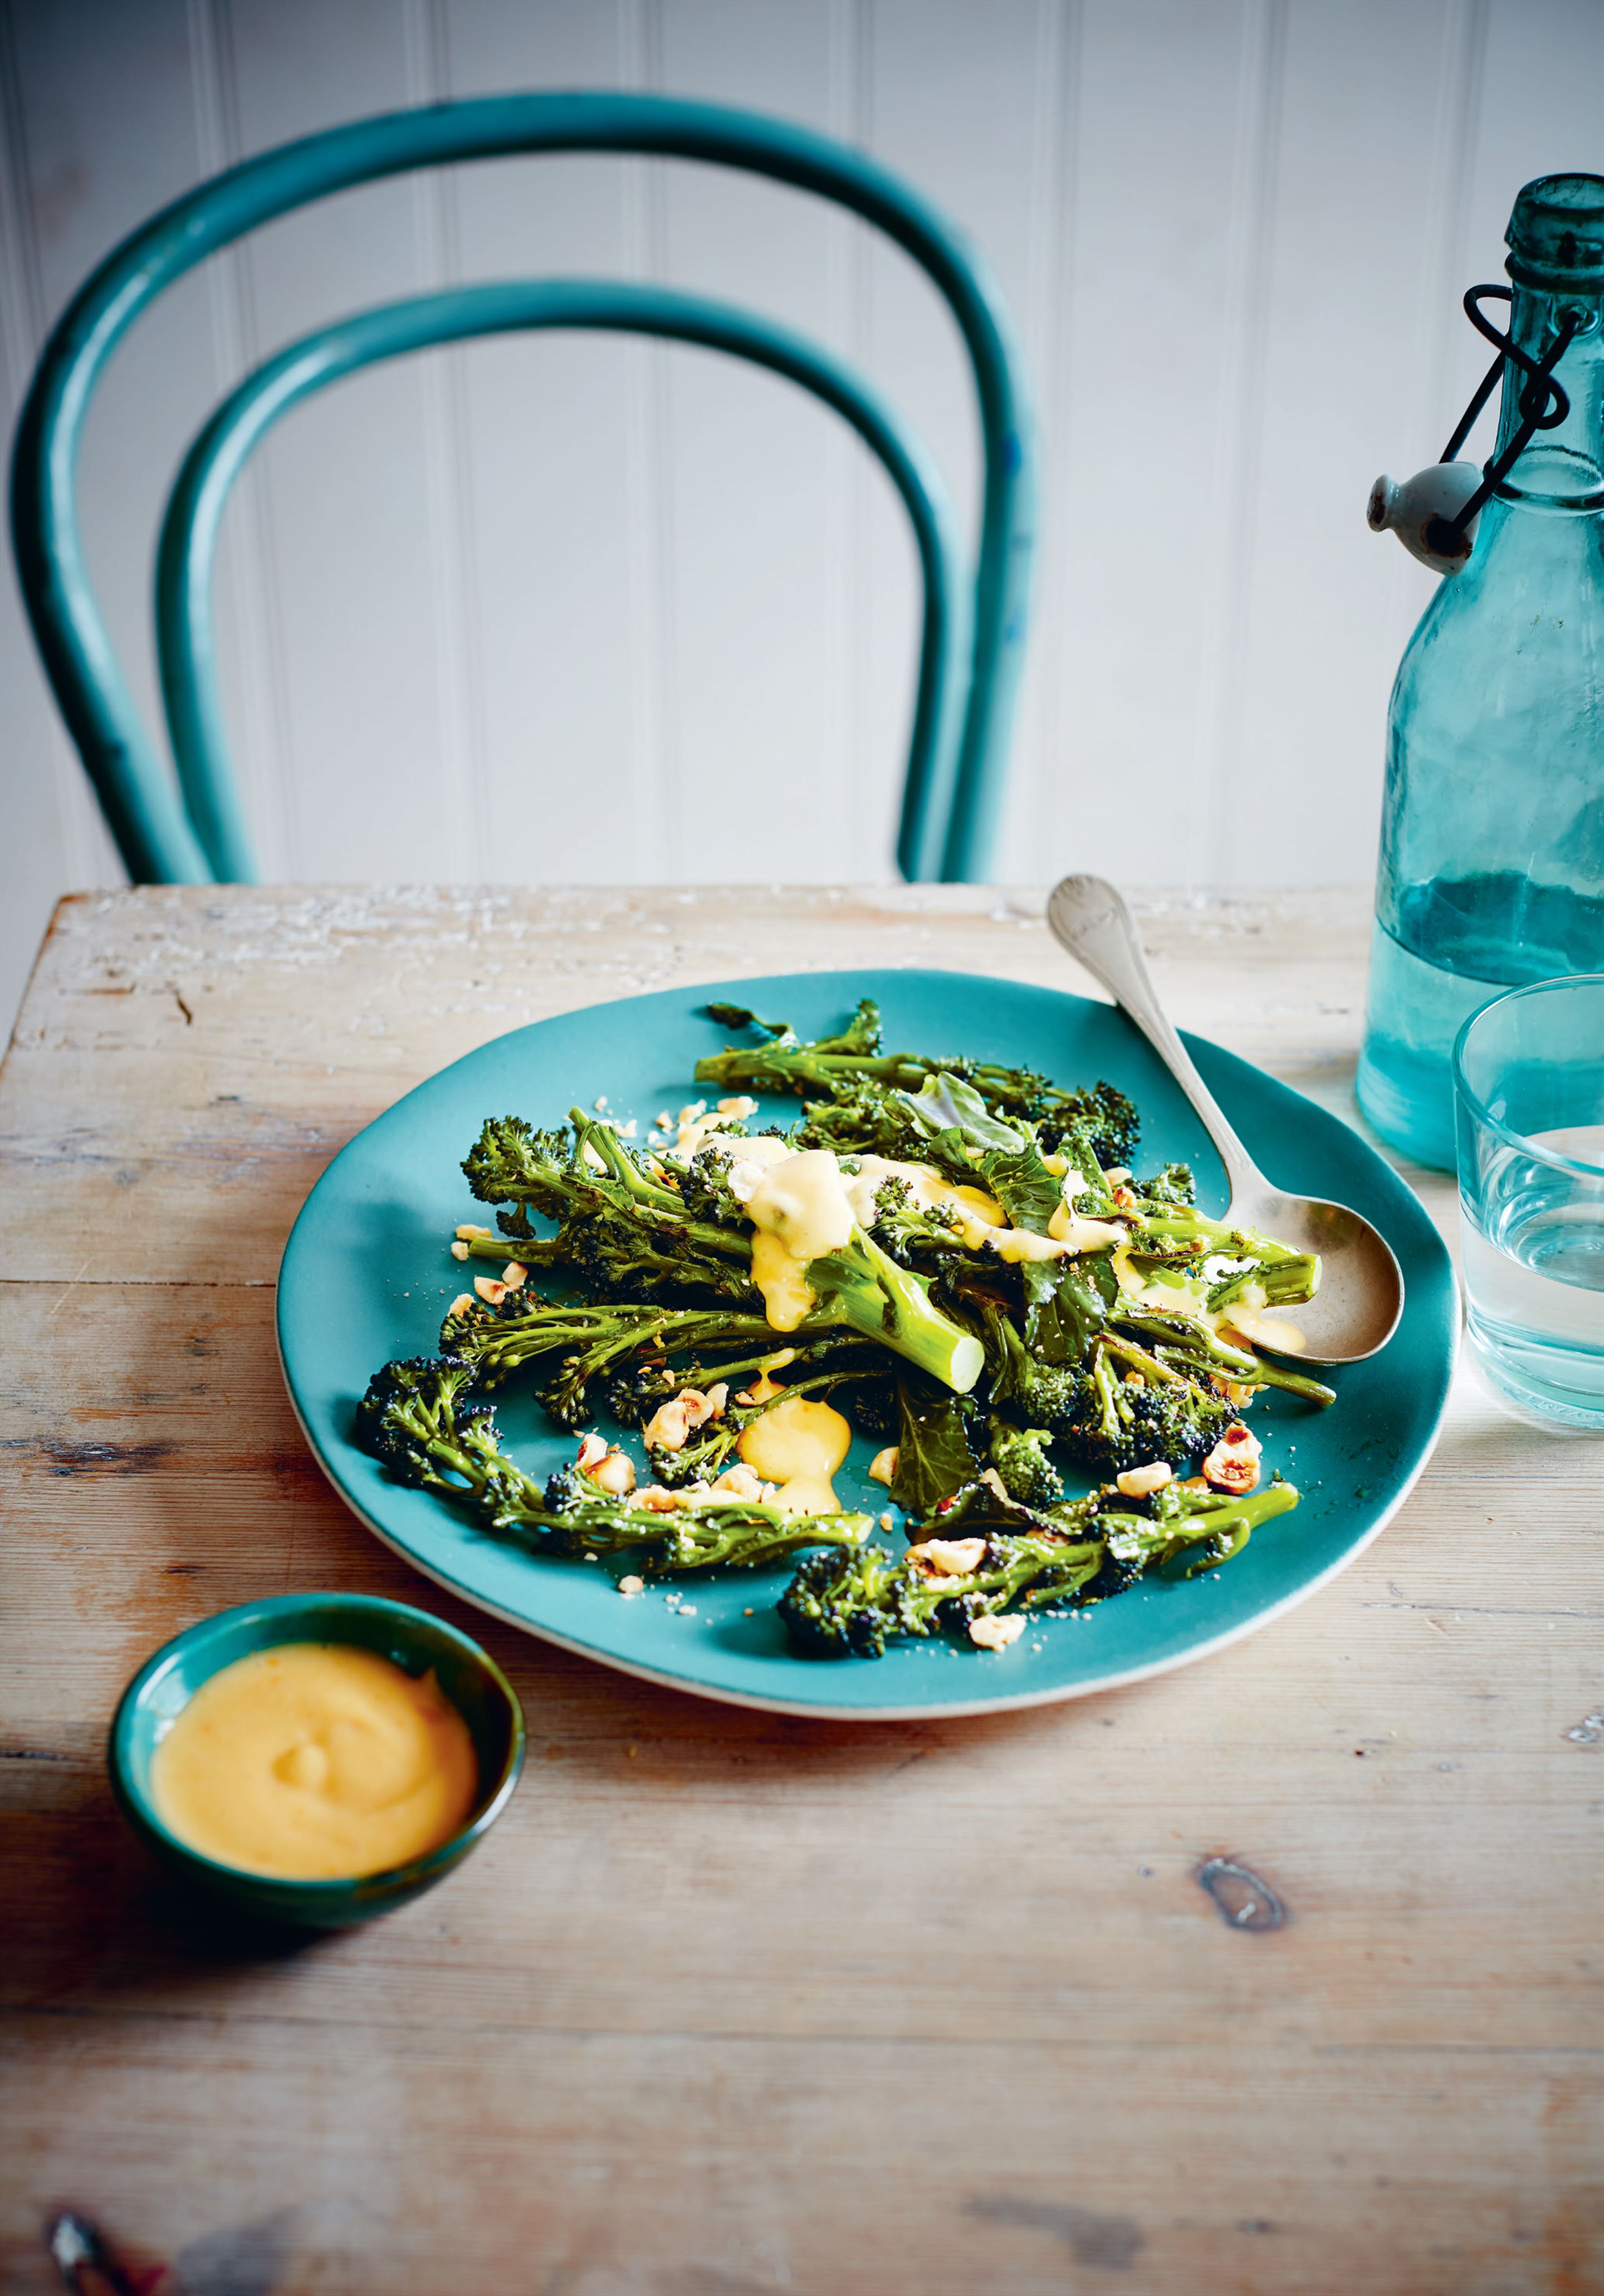 Sprouting broccoli with blood orange hollandaise